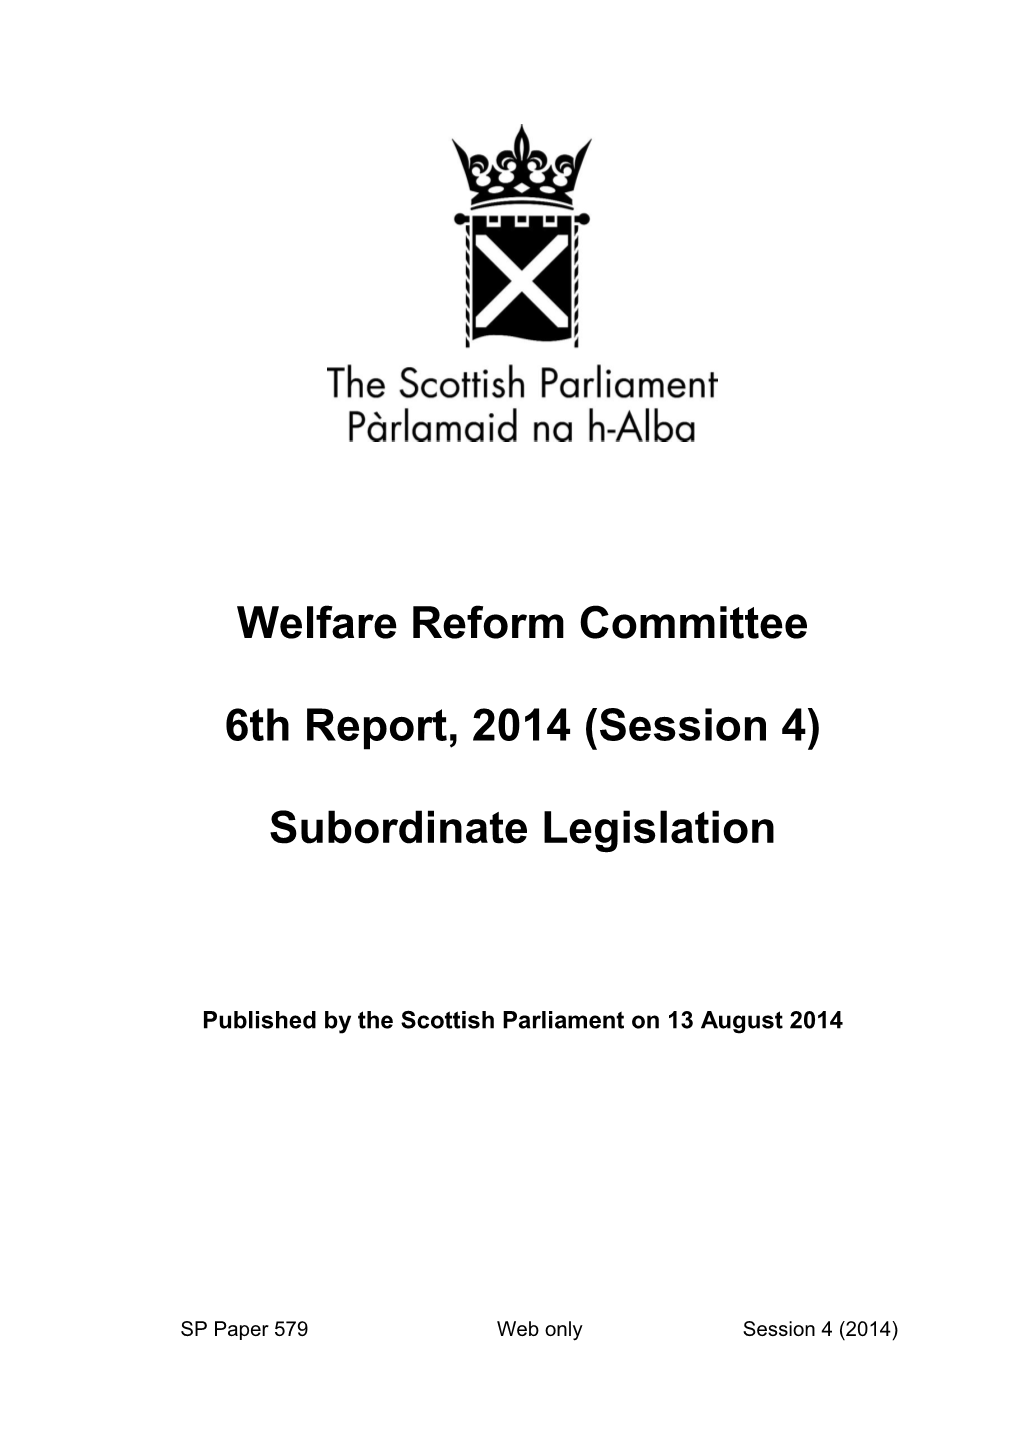 Welfare Reform Committee 6Th Report, 2014 (Session 4)